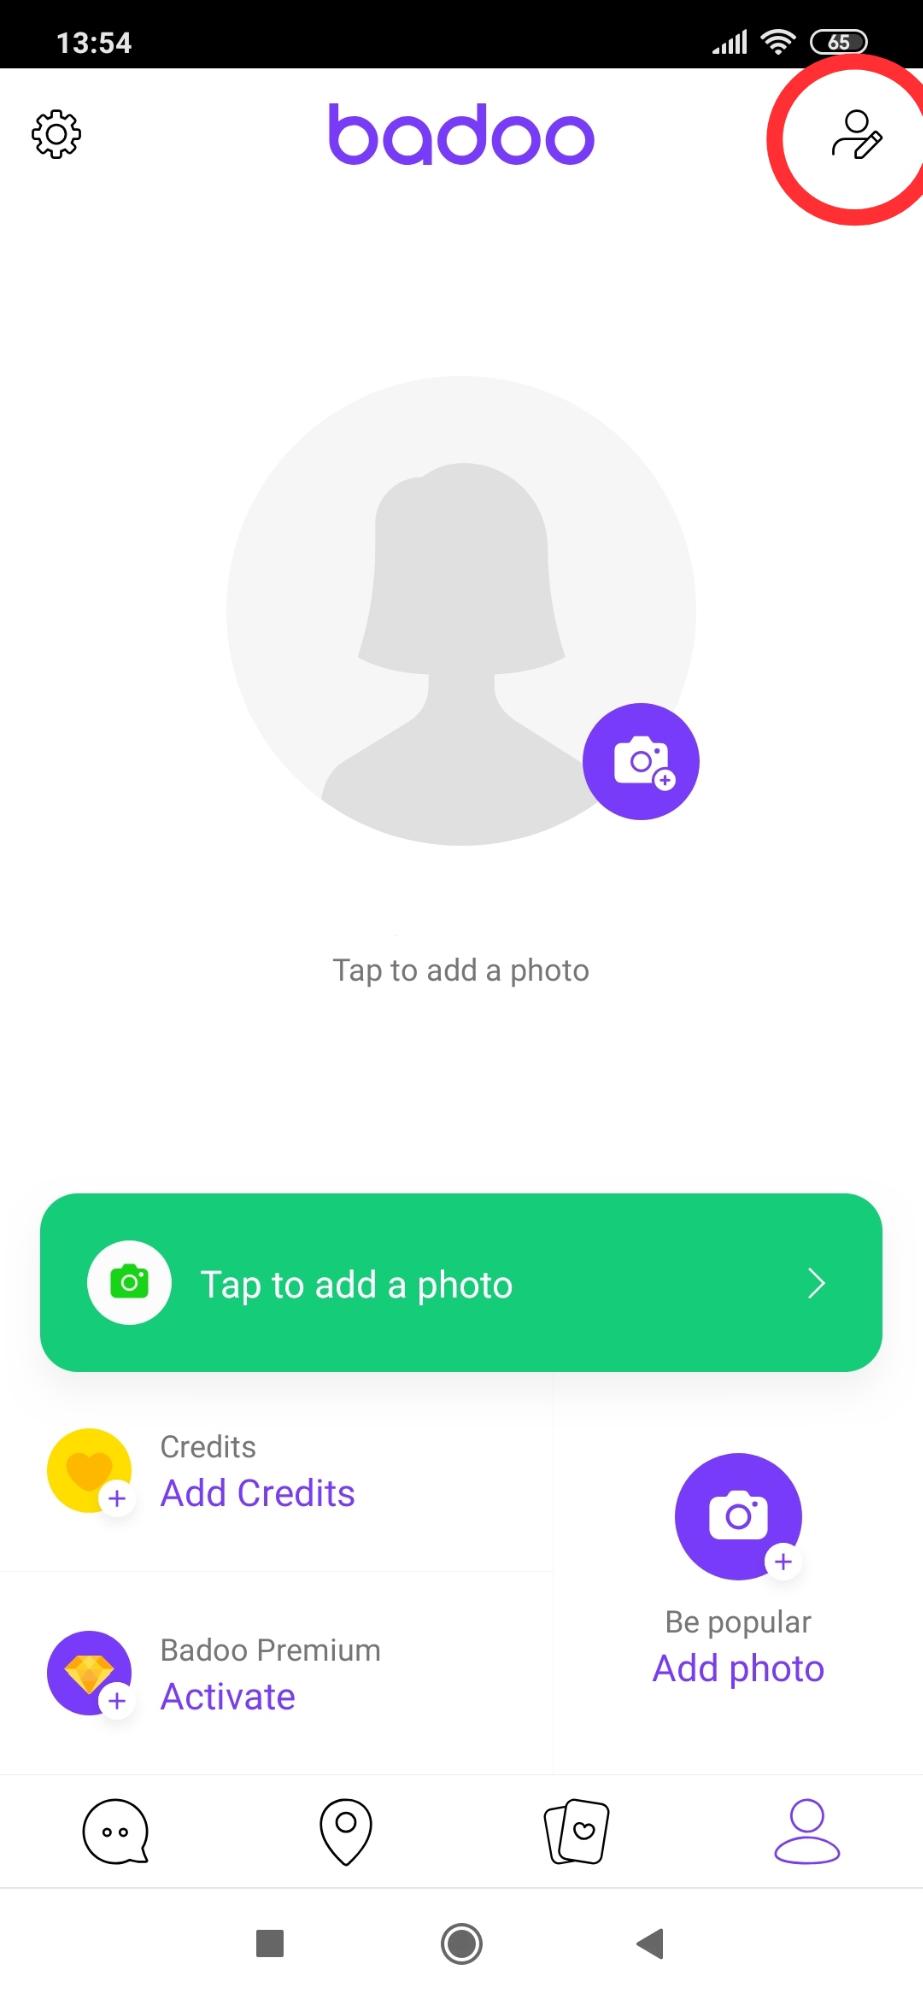 How to Find Matches and Send Messages on Badoo Mobile App